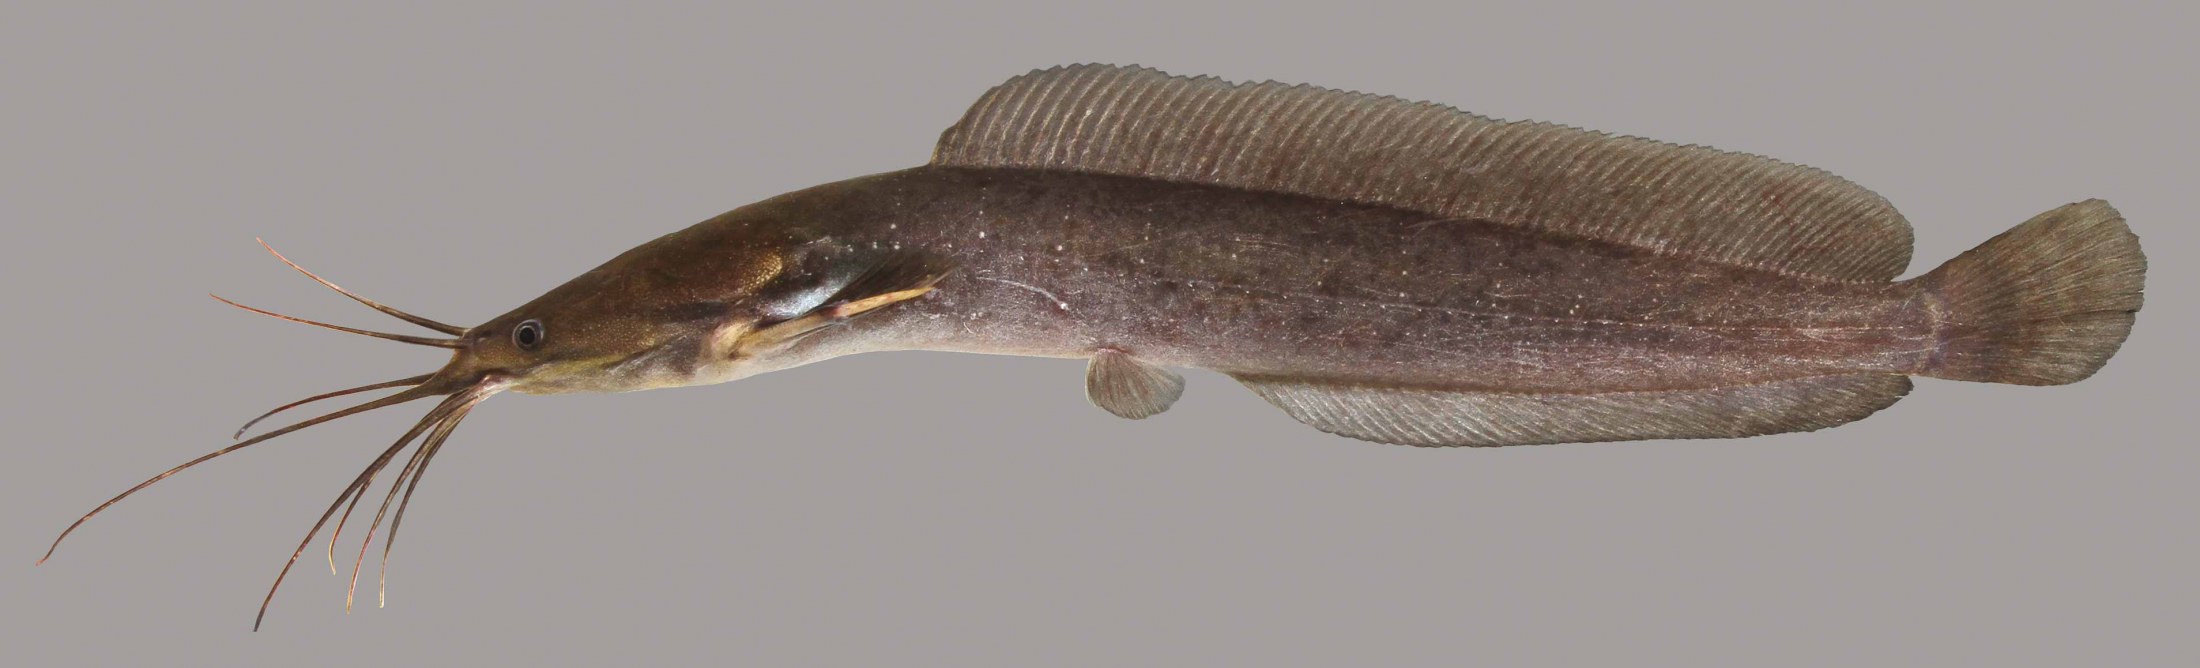 Lateral view of a walking catfish